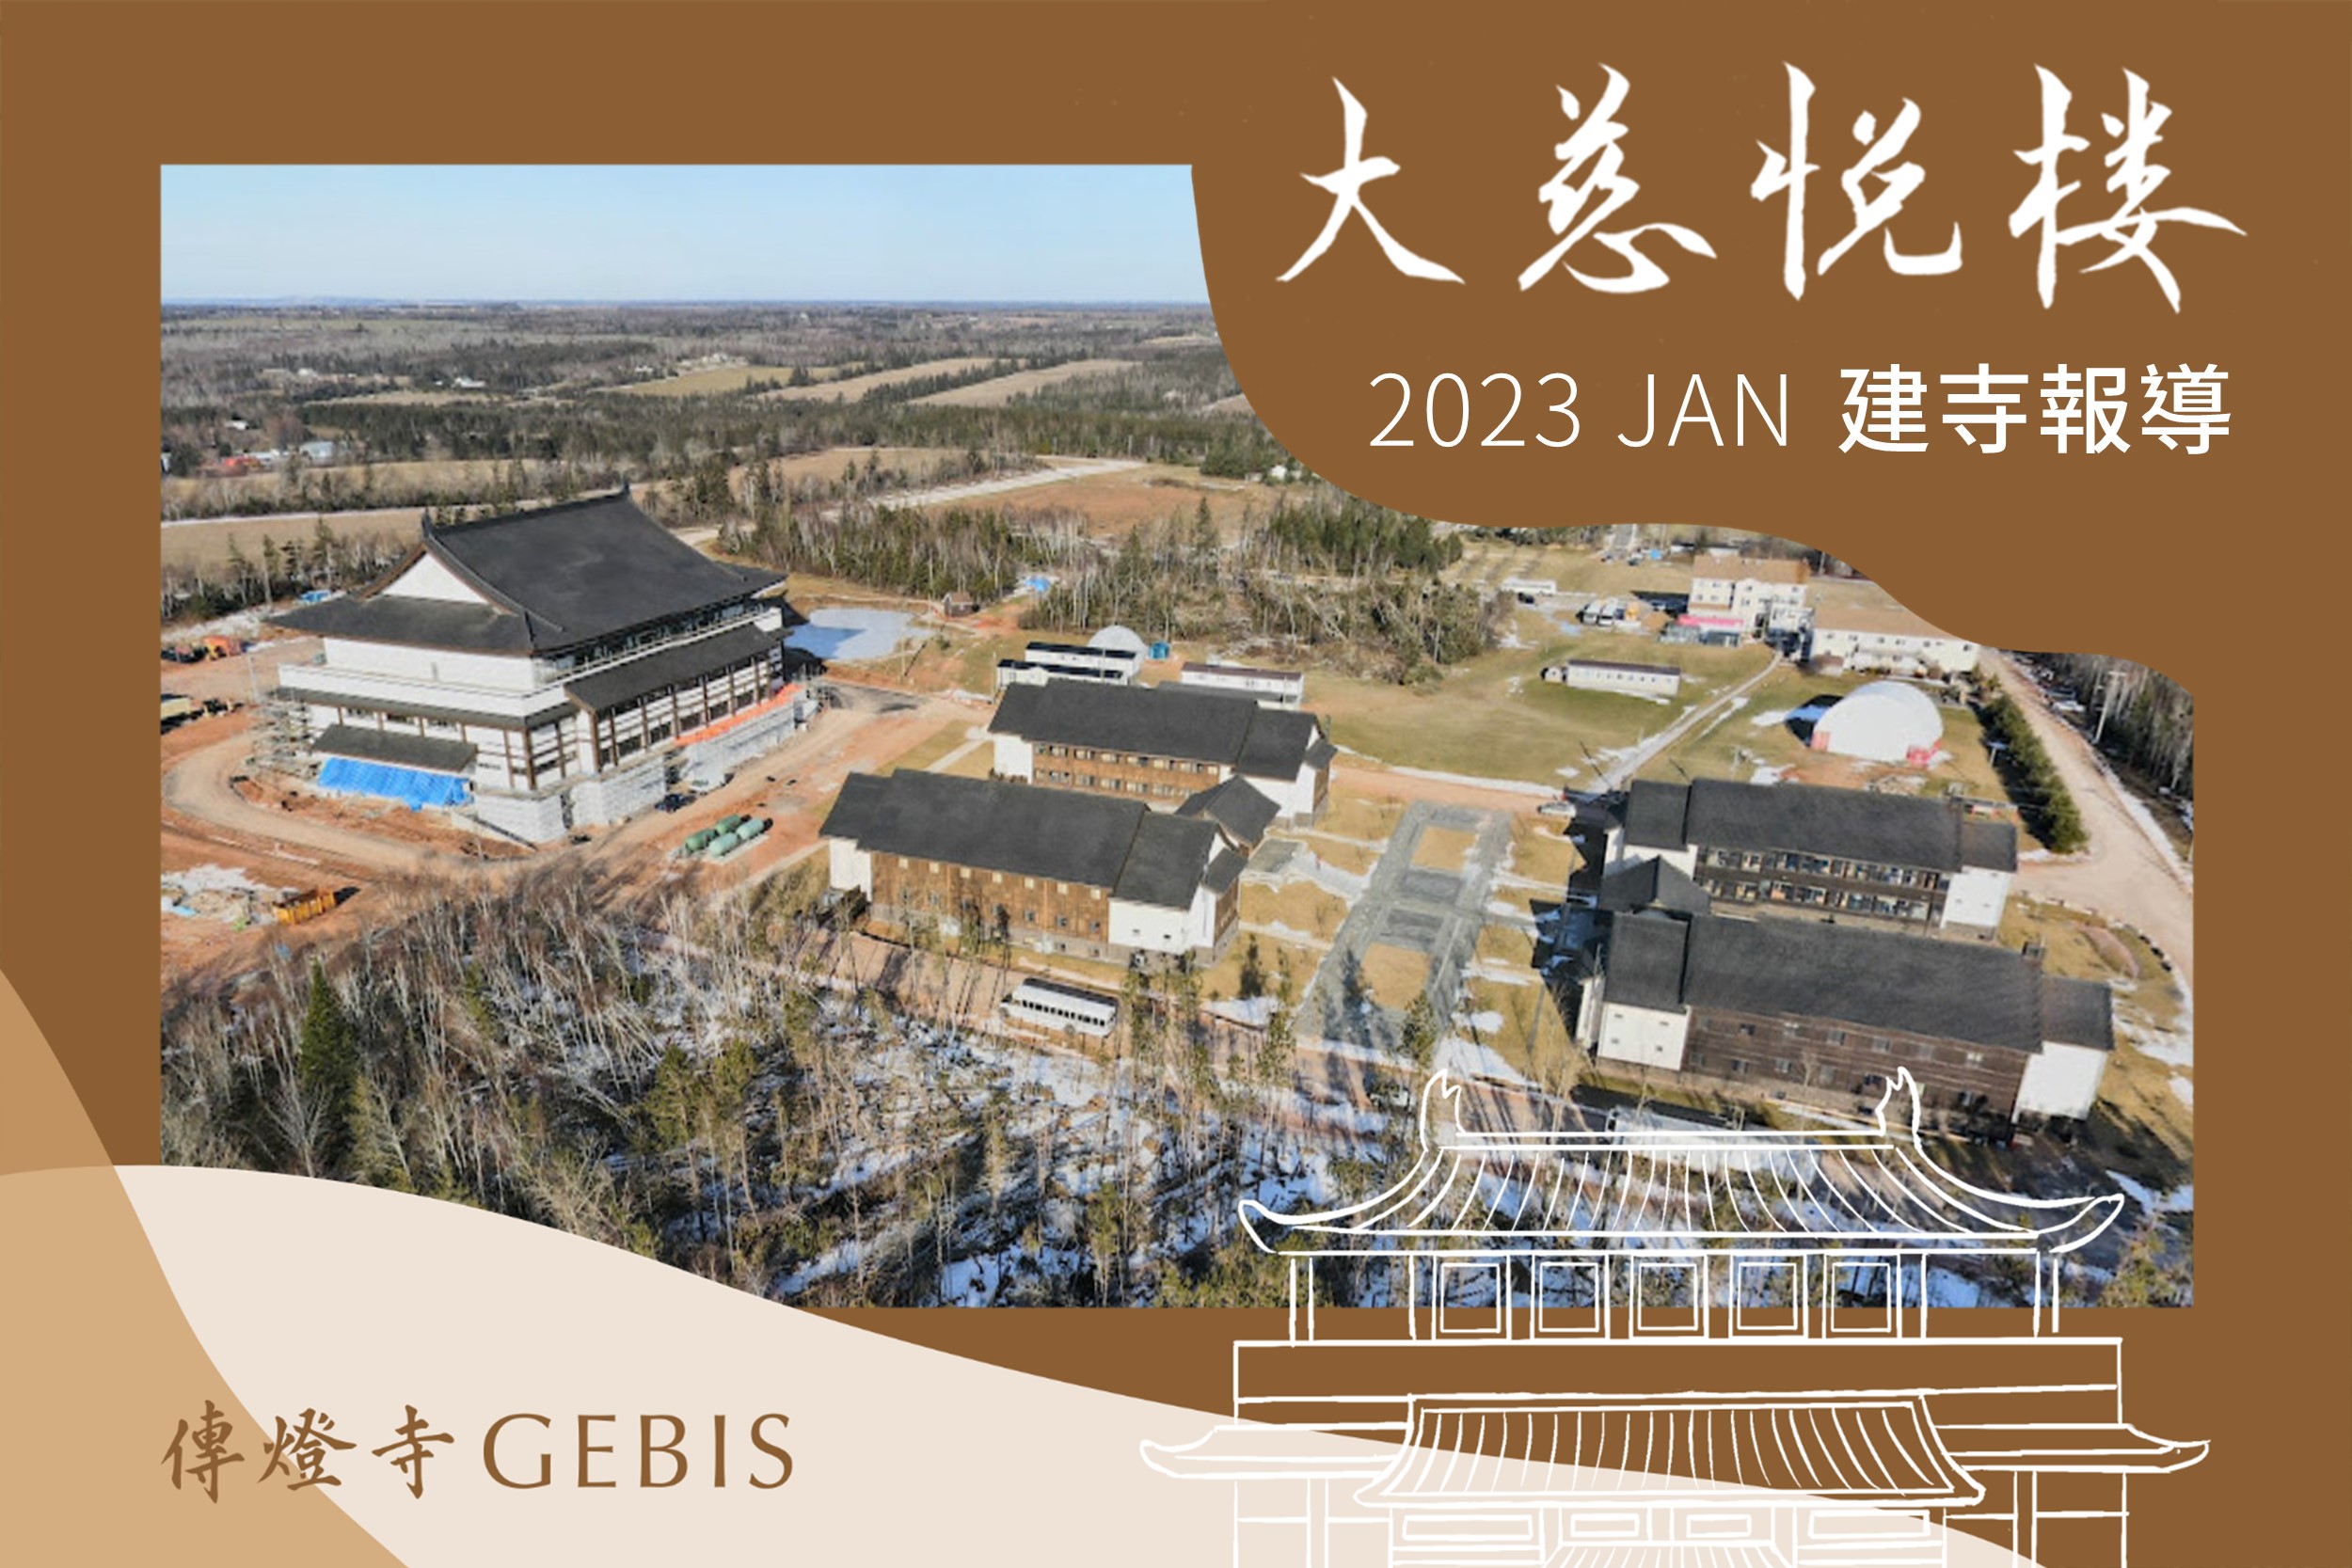 You are currently viewing 傳燈寺大慈悅樓：2023年1月建寺報導